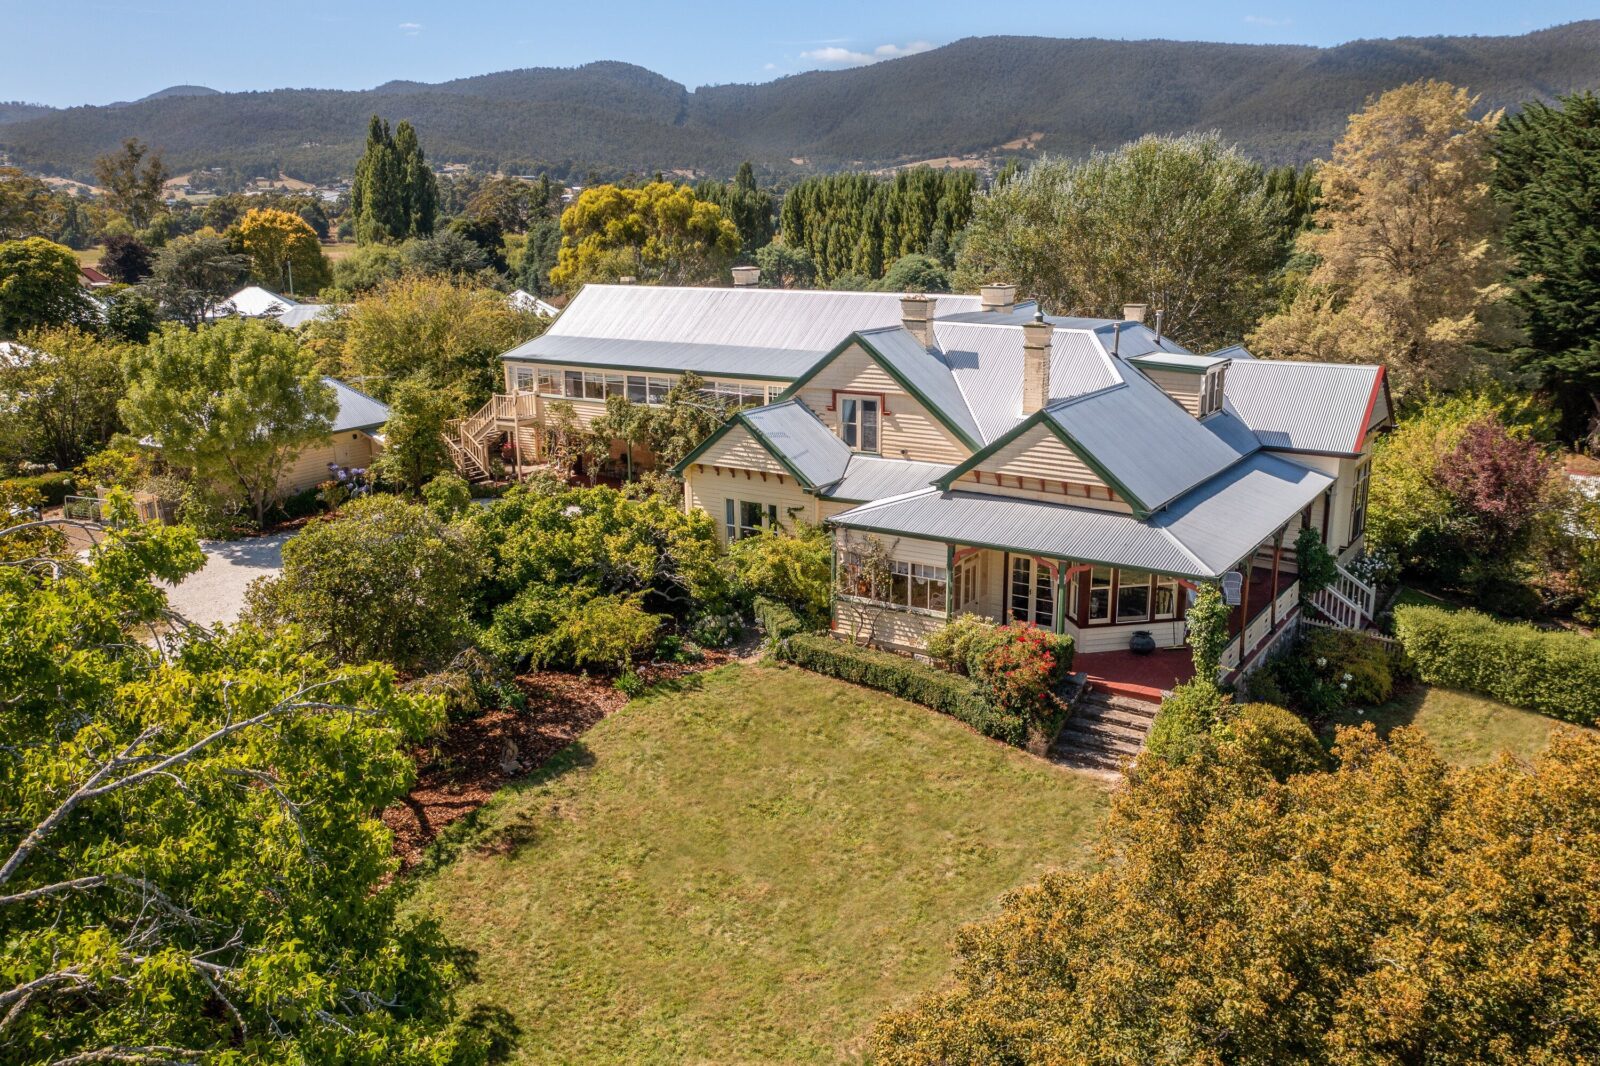 A large, historic weatherboard home within landscaped grounds. The building looks well maintained.